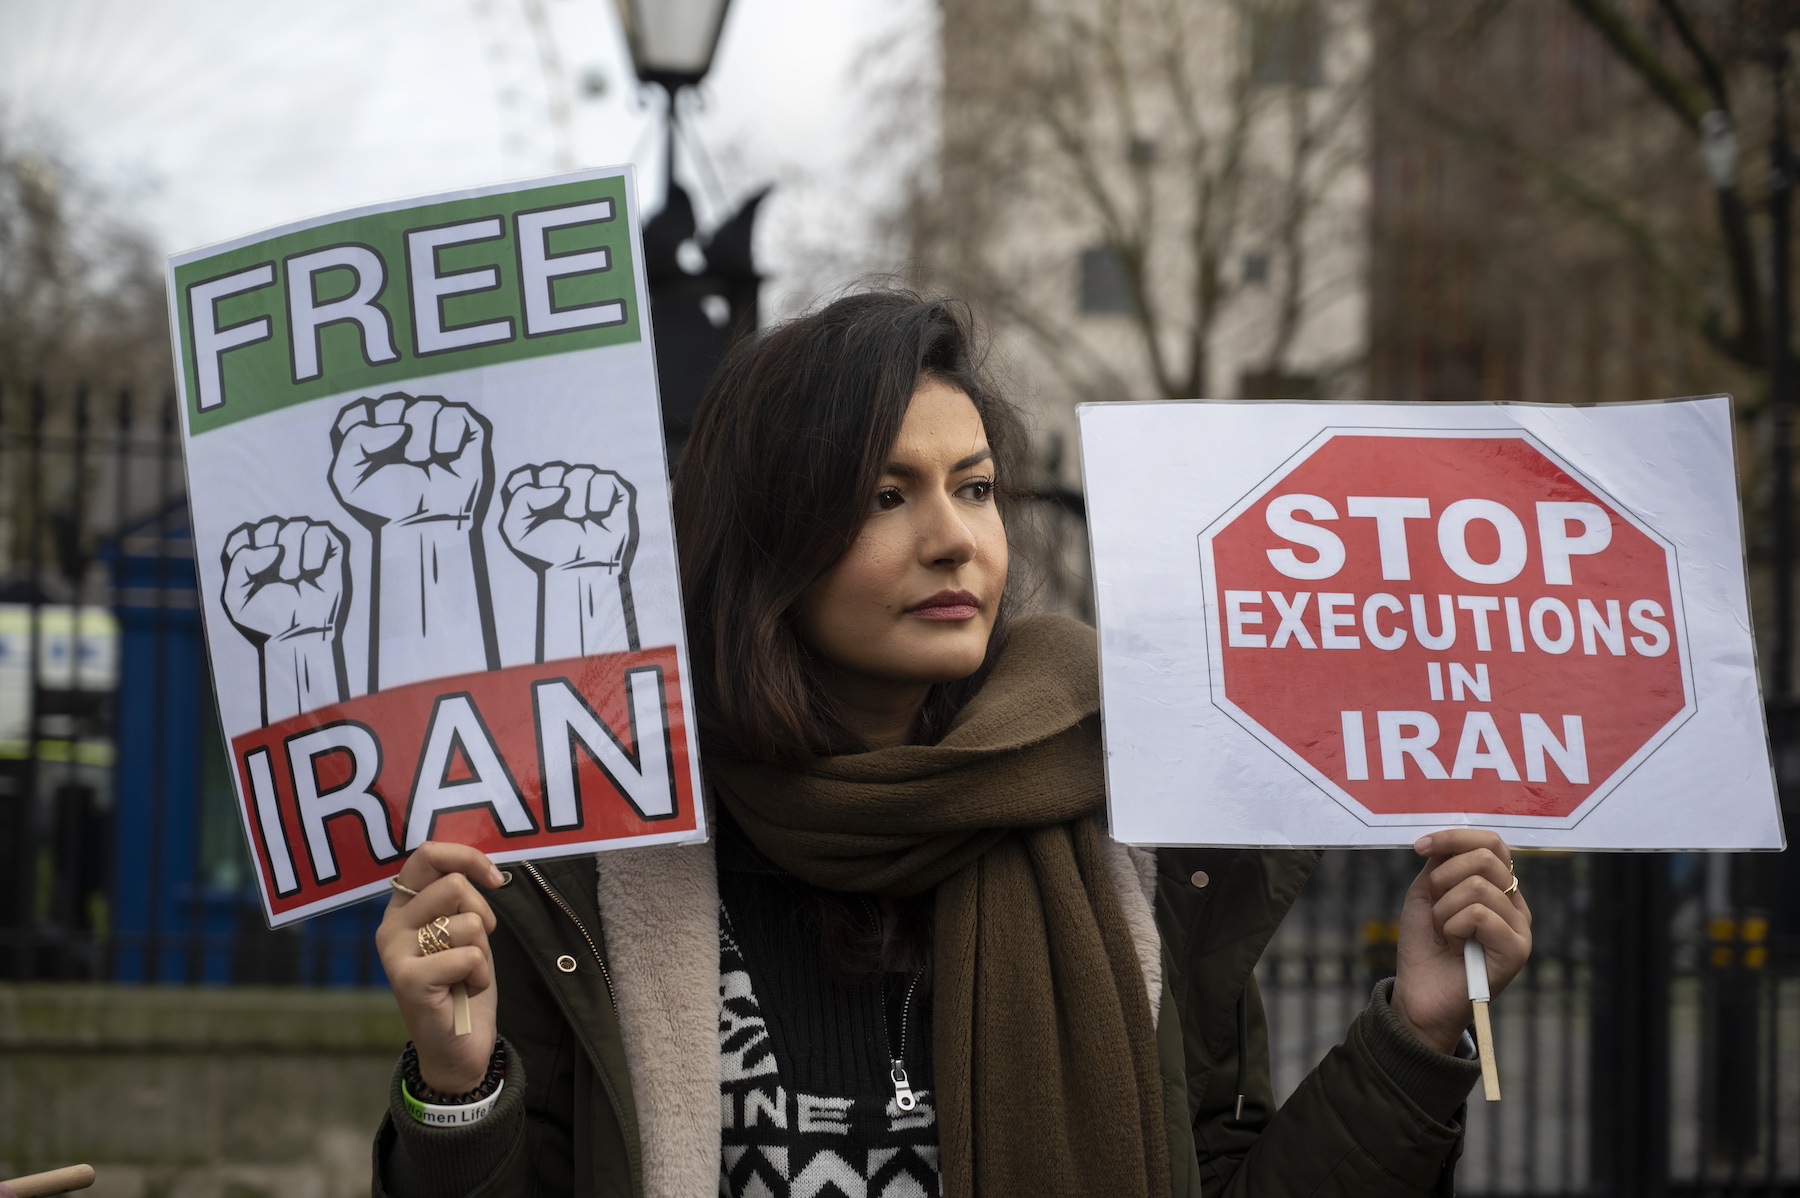 Iranians demonstrate for change in Iran and against execution